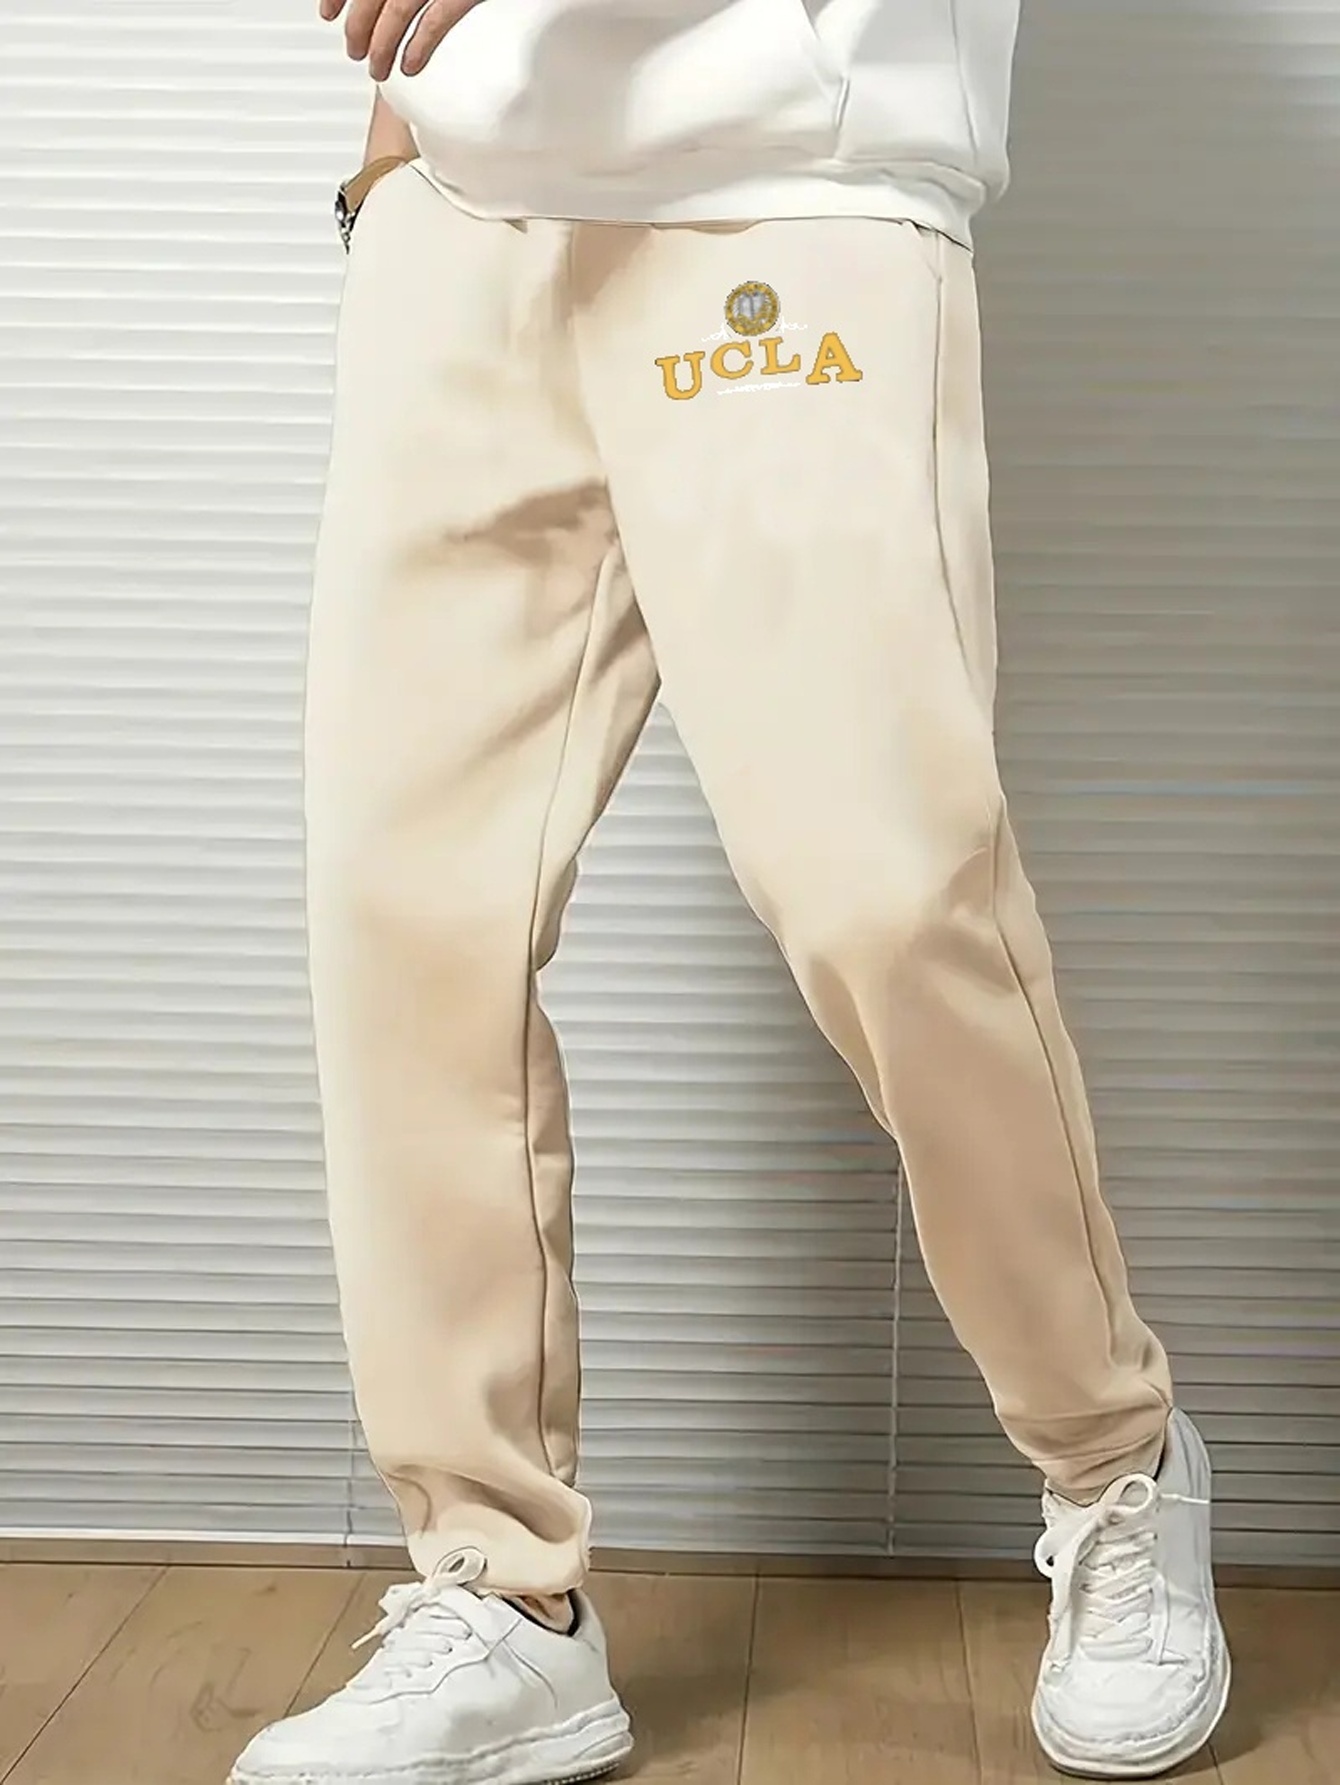 Coast to coast the best tracksuit drip outfit ideas